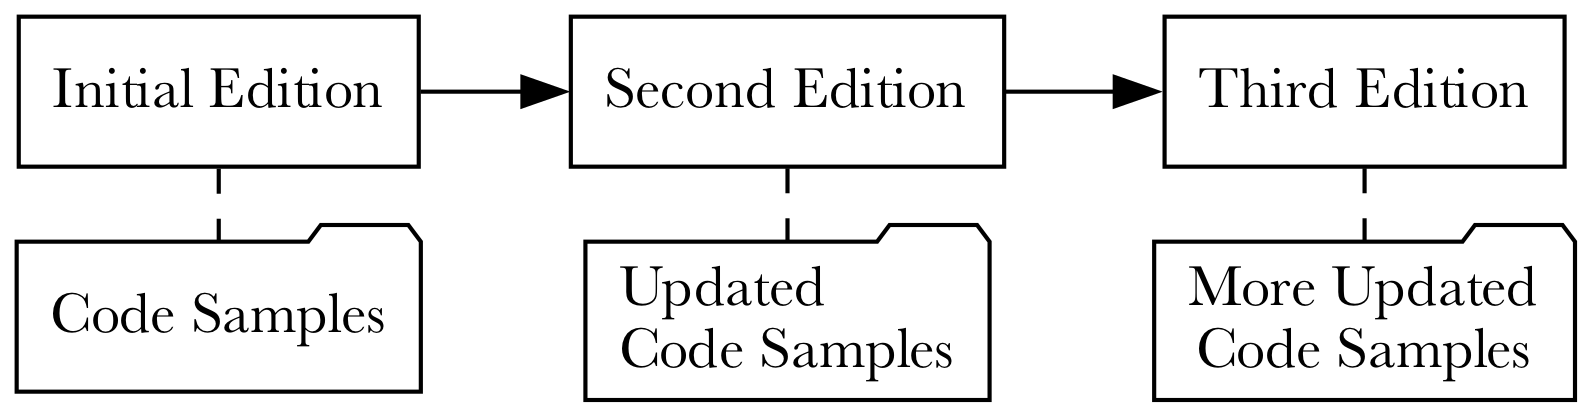 Diagram showing the release of multiple editions of a programming book